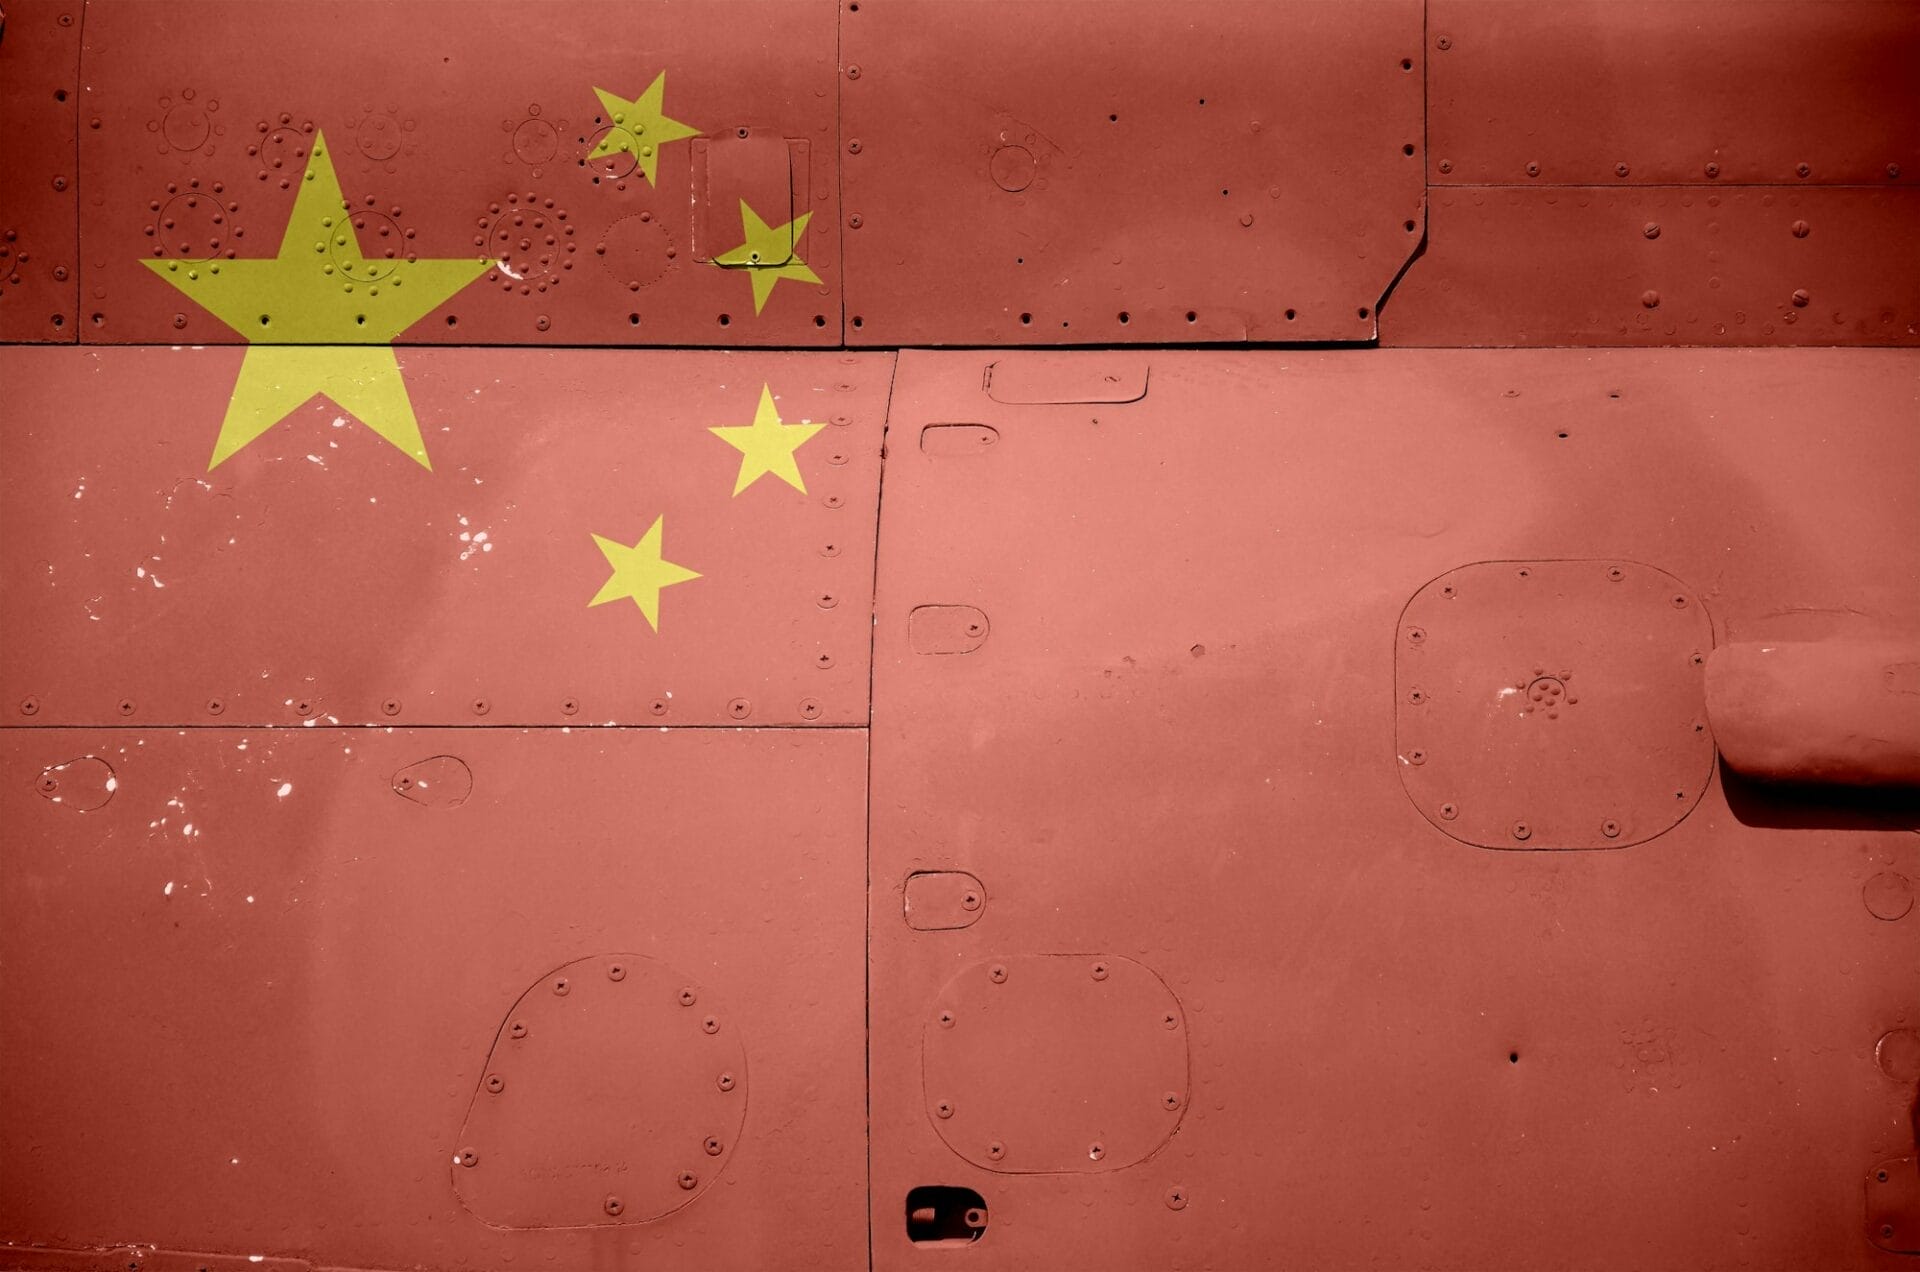 China flag depicted on side part of military armored helicopter close up